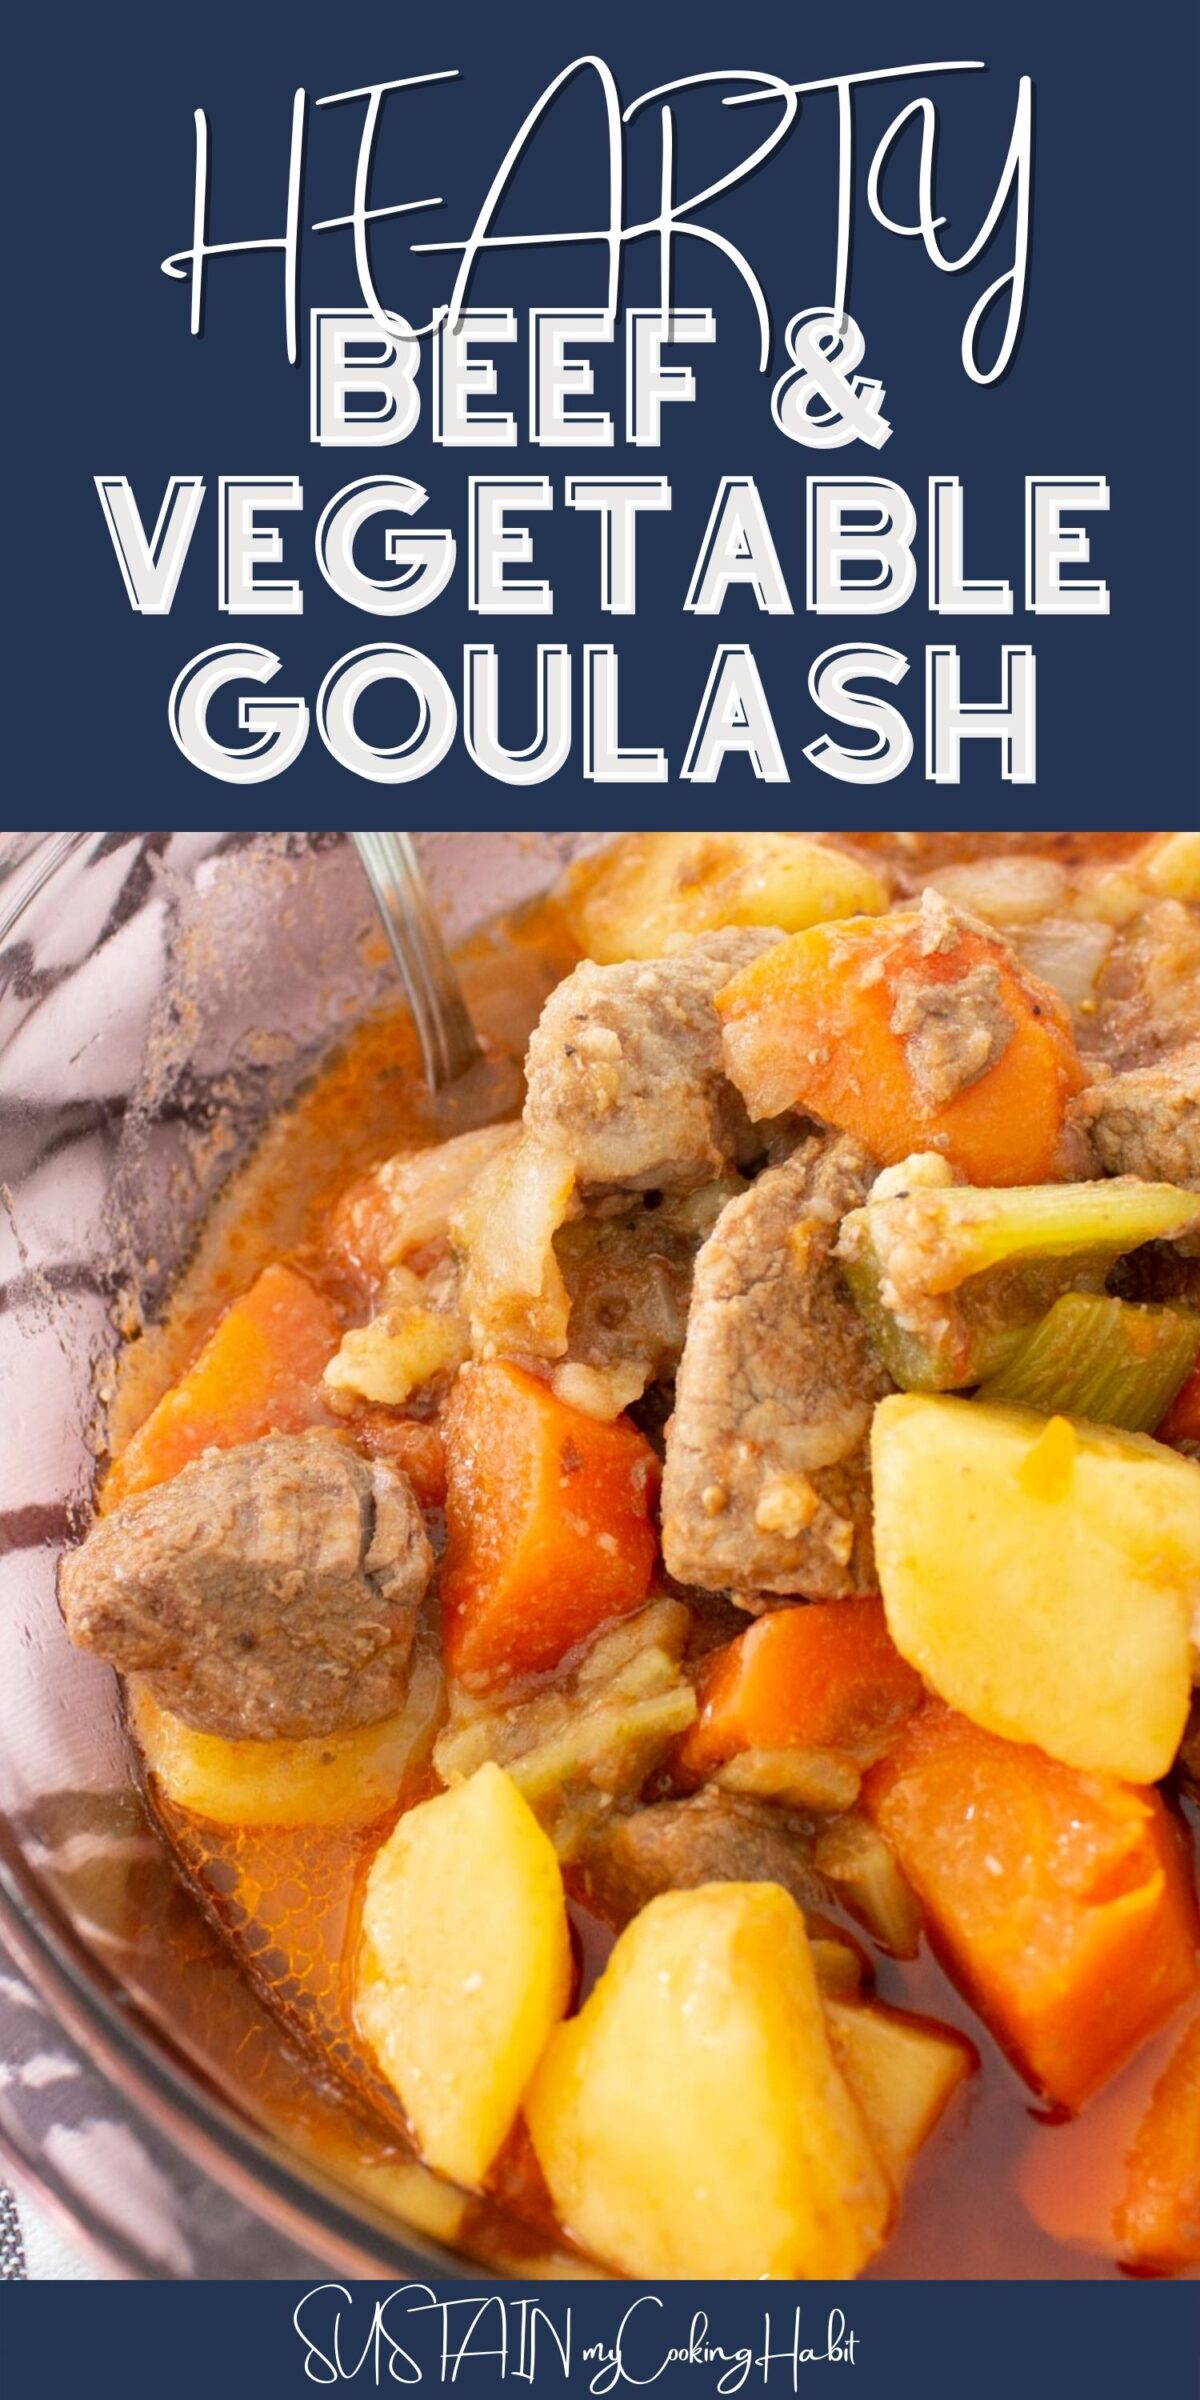 Close up of a bowl of hearty beef and vegetable goulash with text overlay.